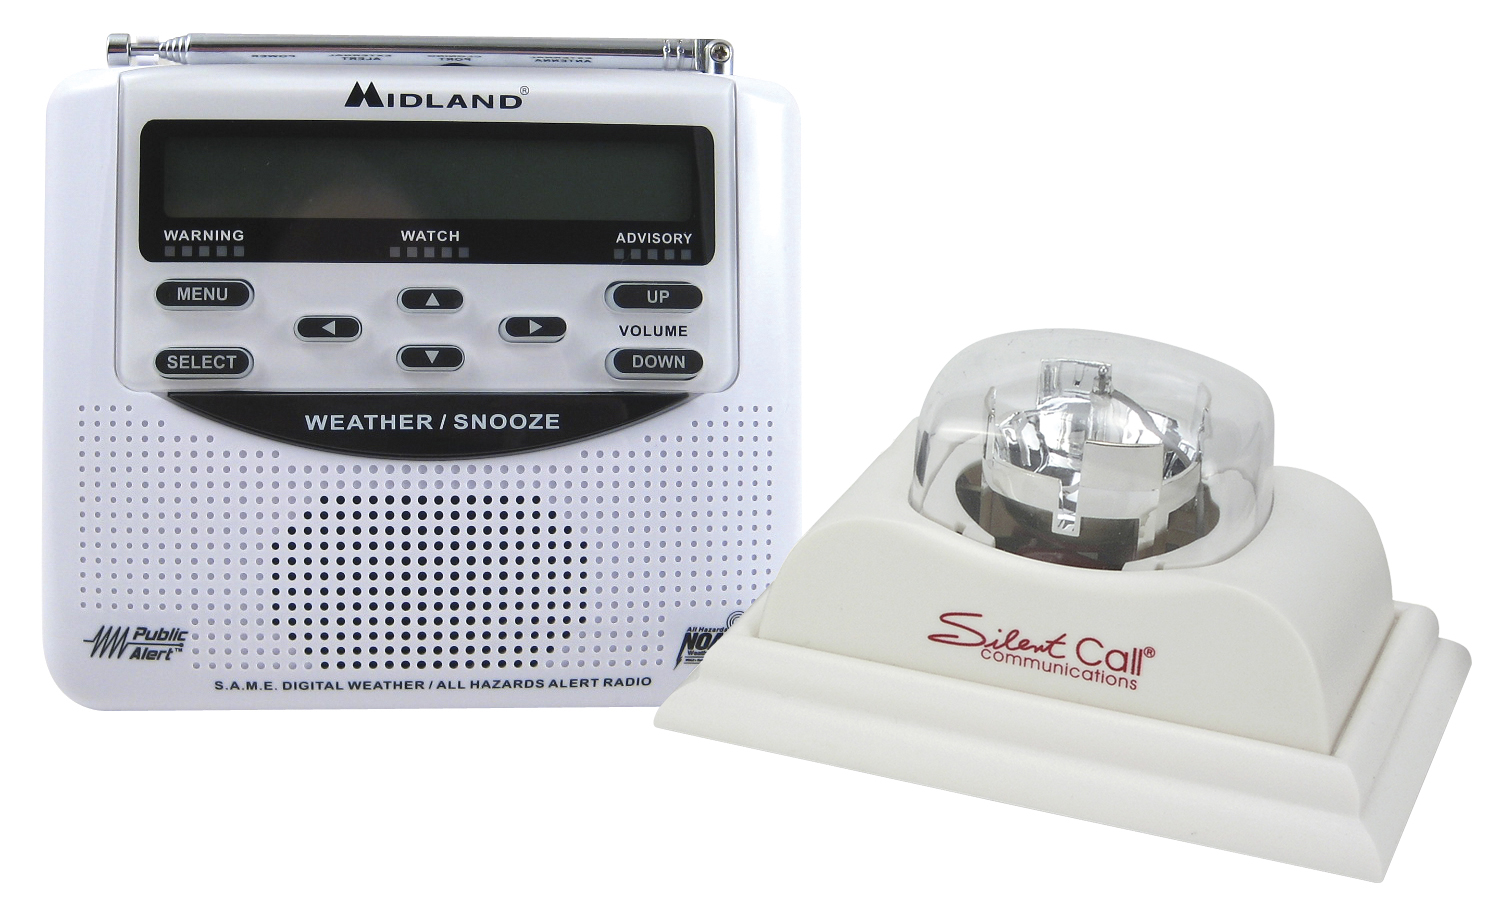 The Midland weather radio with Silent Call strobe light is a complete severe weather system that provides audible and strobe alerting.